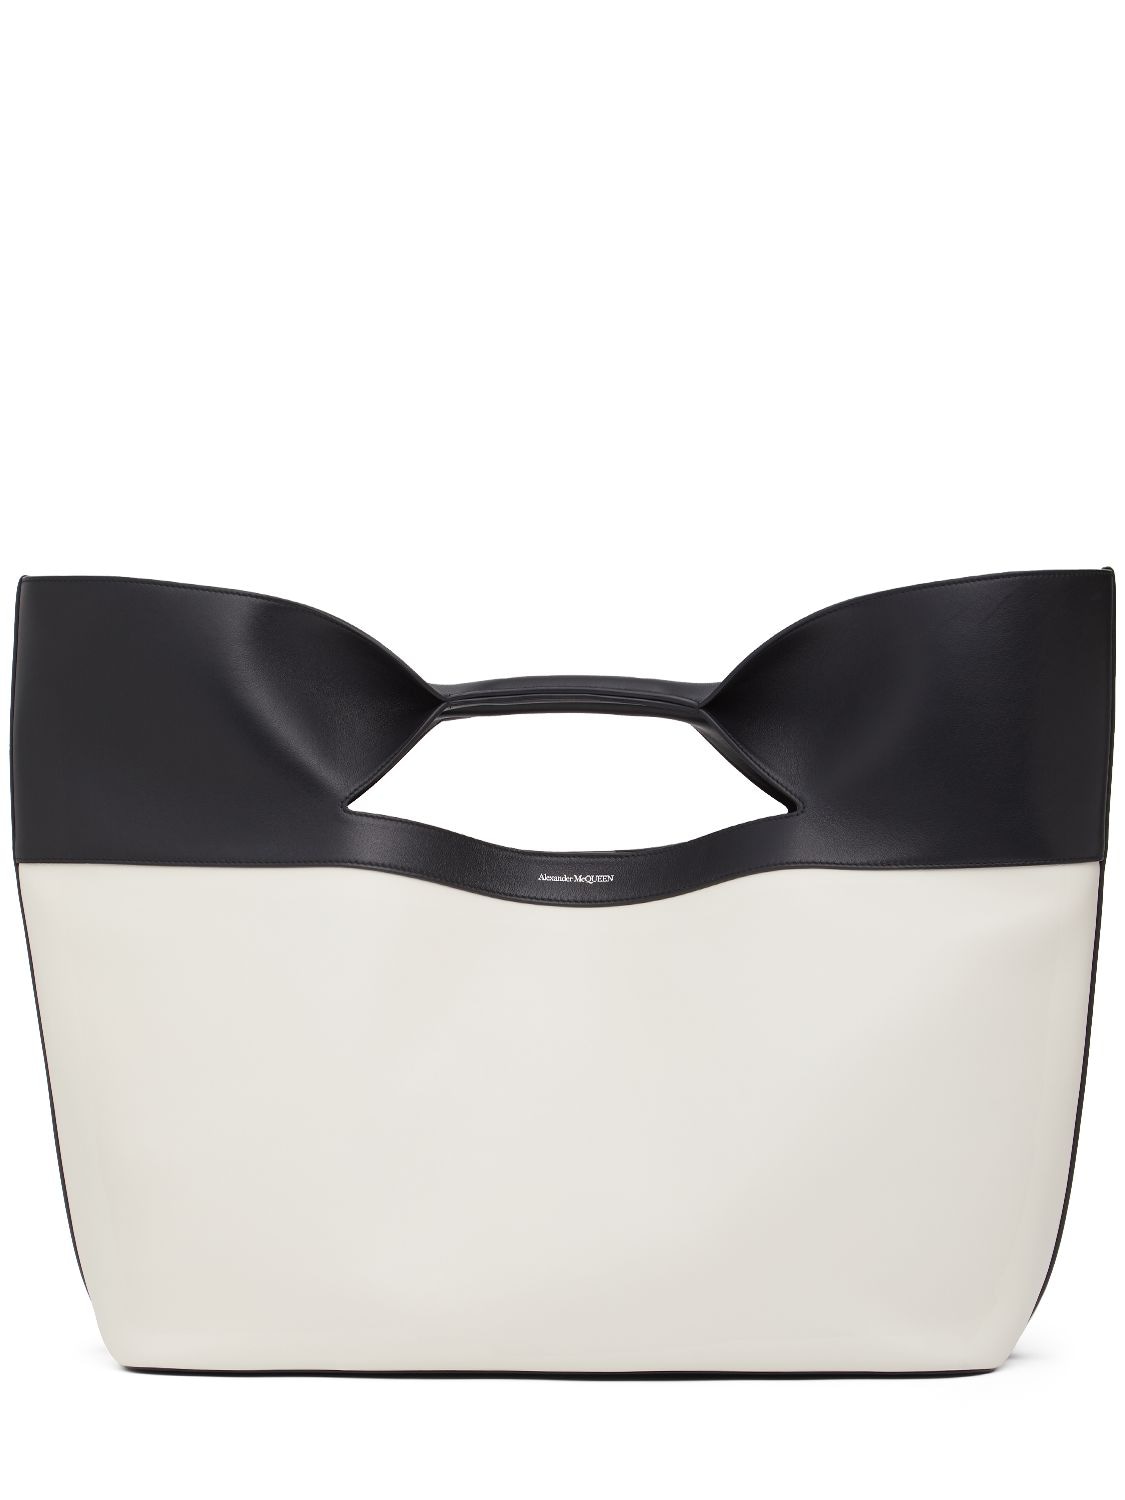 ALEXANDER MCQUEEN Small The Bow Leather Tote Bag